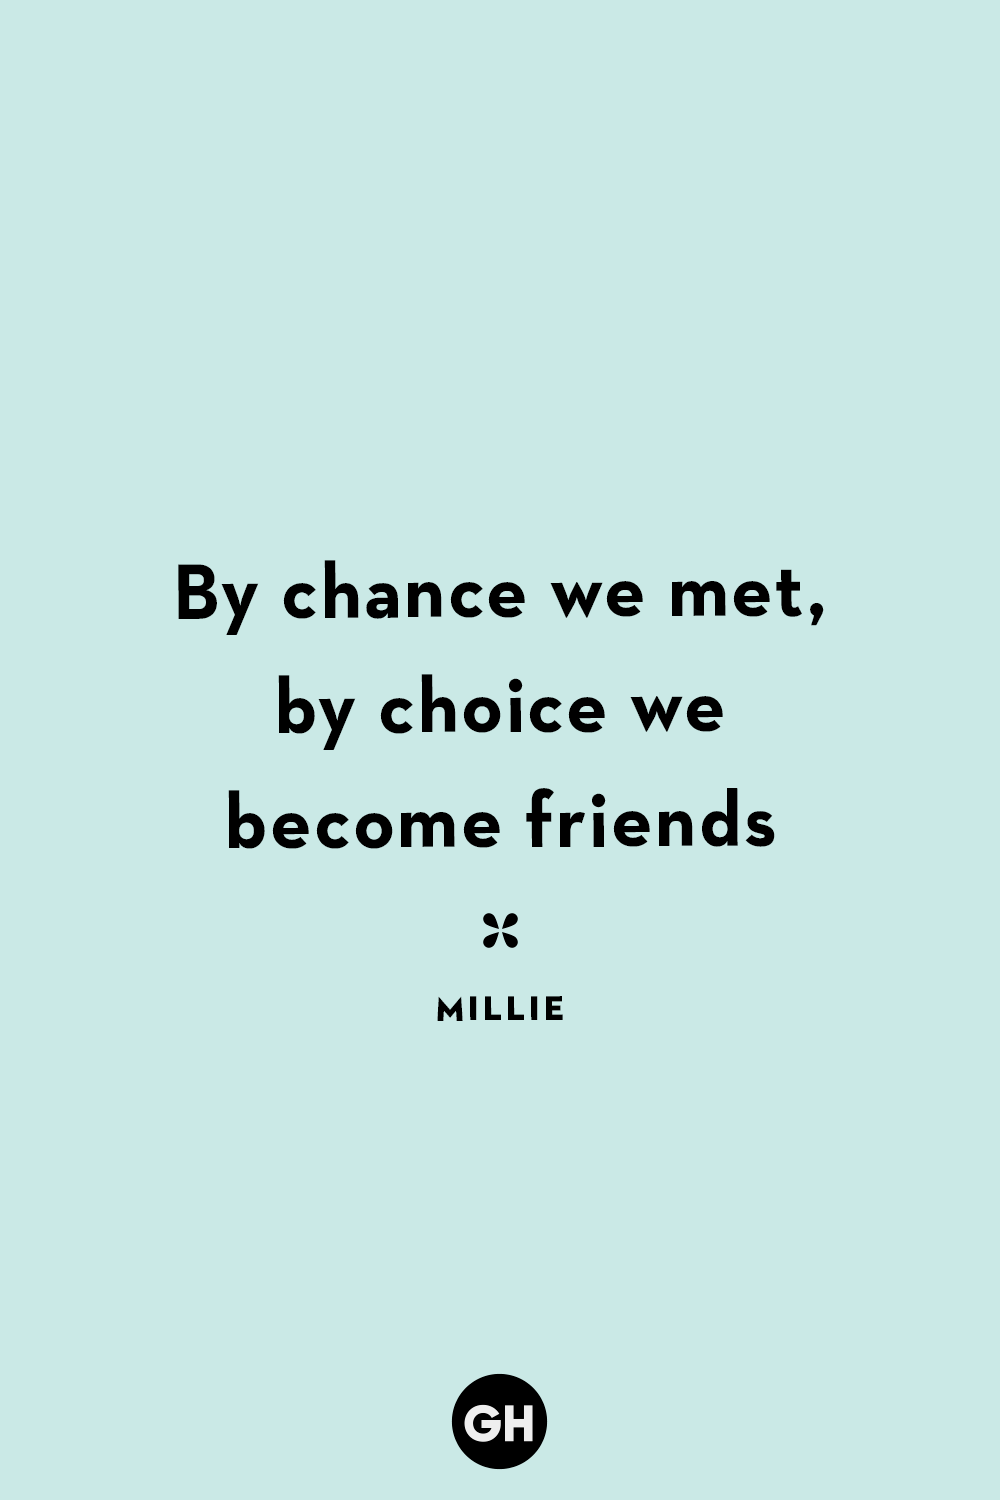 Gh Friendship Quotes Millie 64492fe751387 